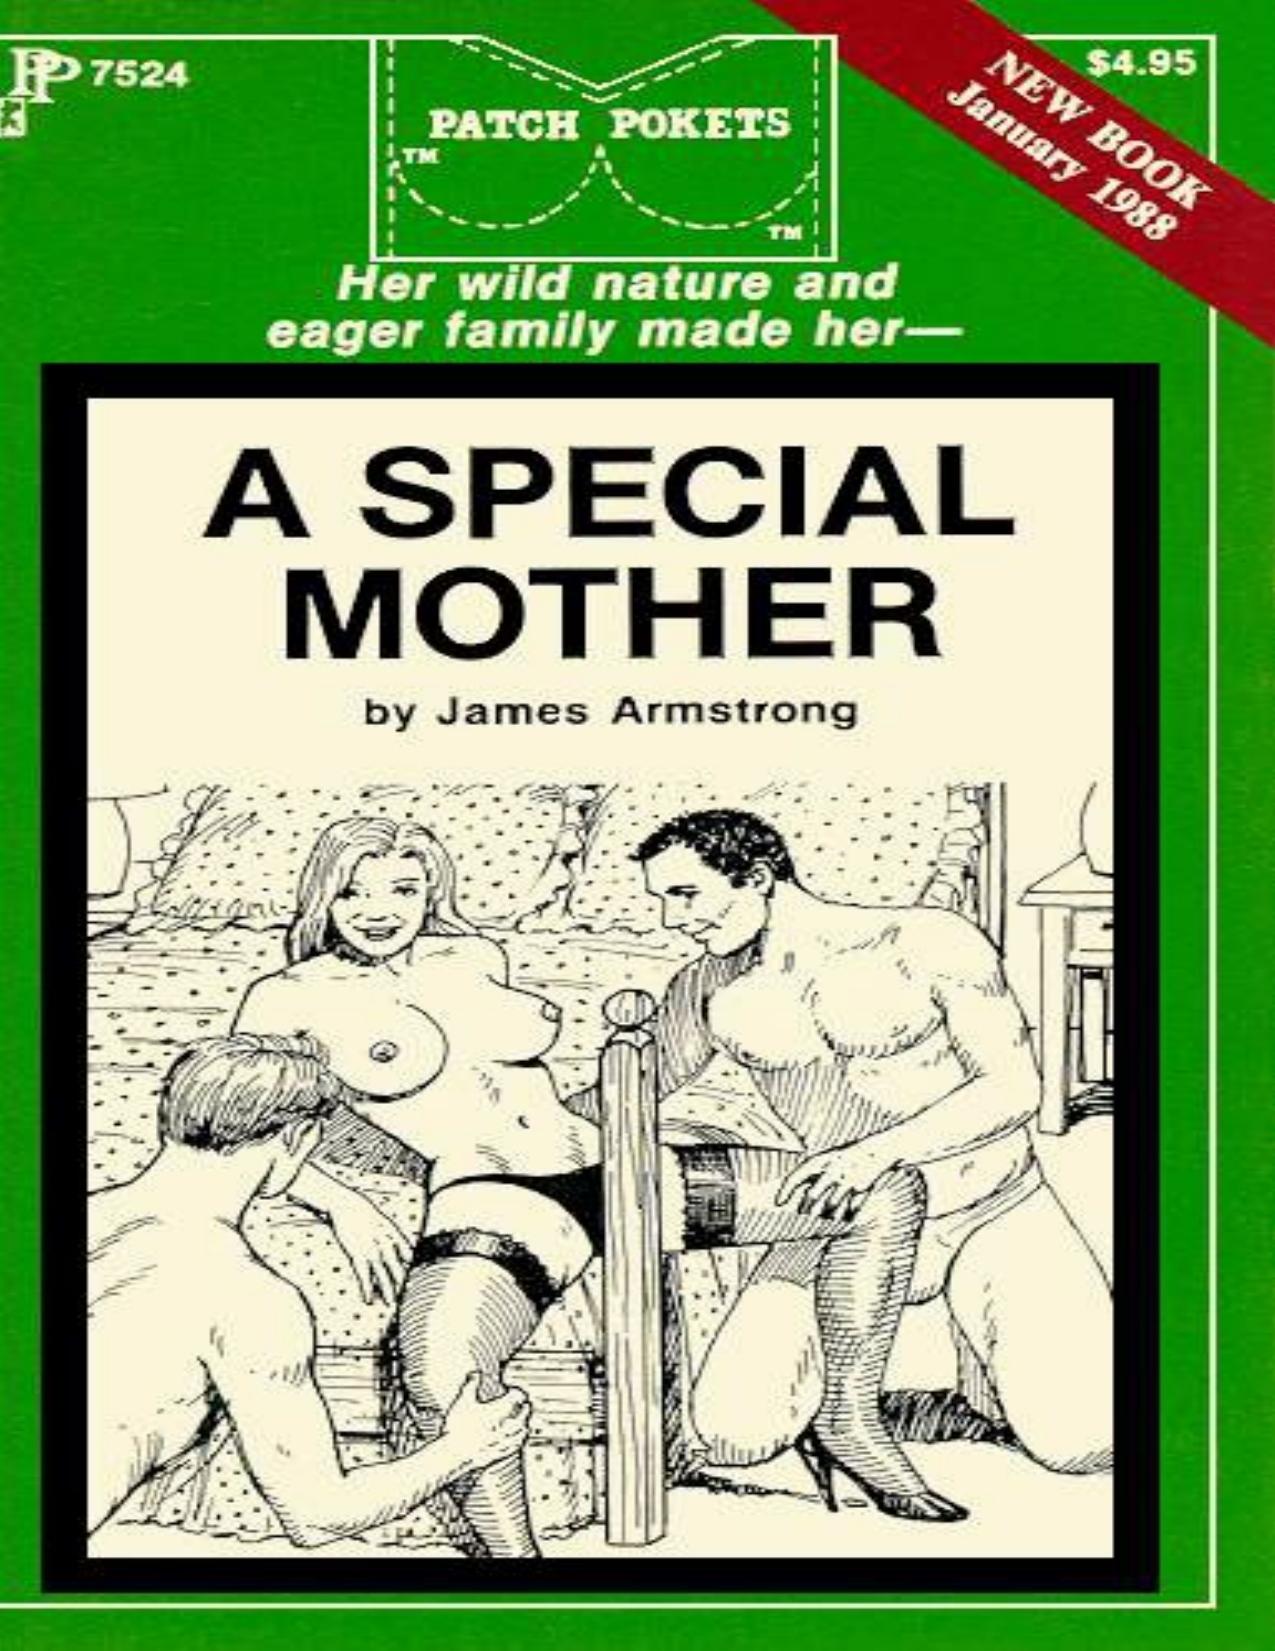 A Special Mother by James Armstrong